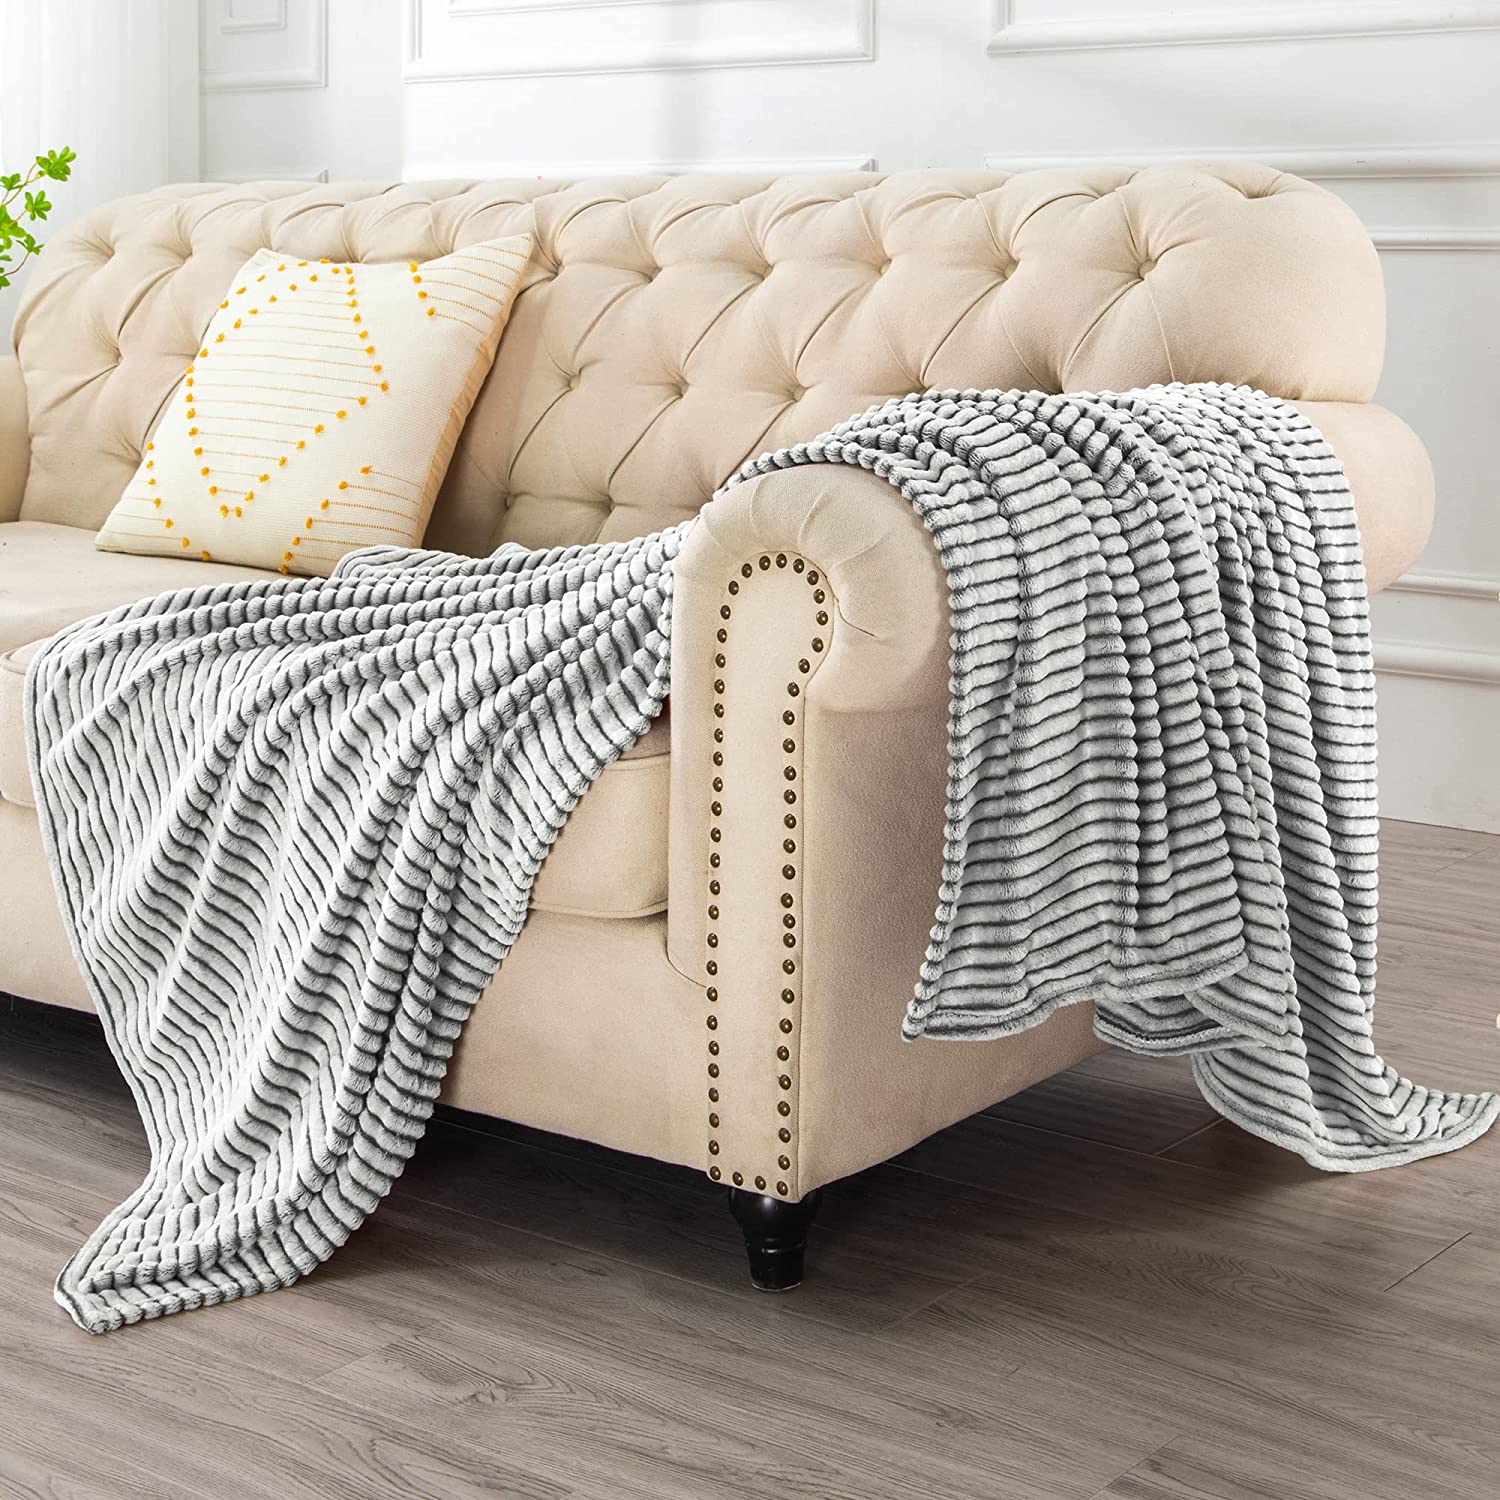 2021 Good Quality Chunky Throw Blankets - Fleece Throw Blanket for Couch – 3D Ribbed Jacquard Soft and Warm Decorative Blanket – Cozy, Fuzzy, Fluffy, Plush Lightweight Black and White Throw Blanke...